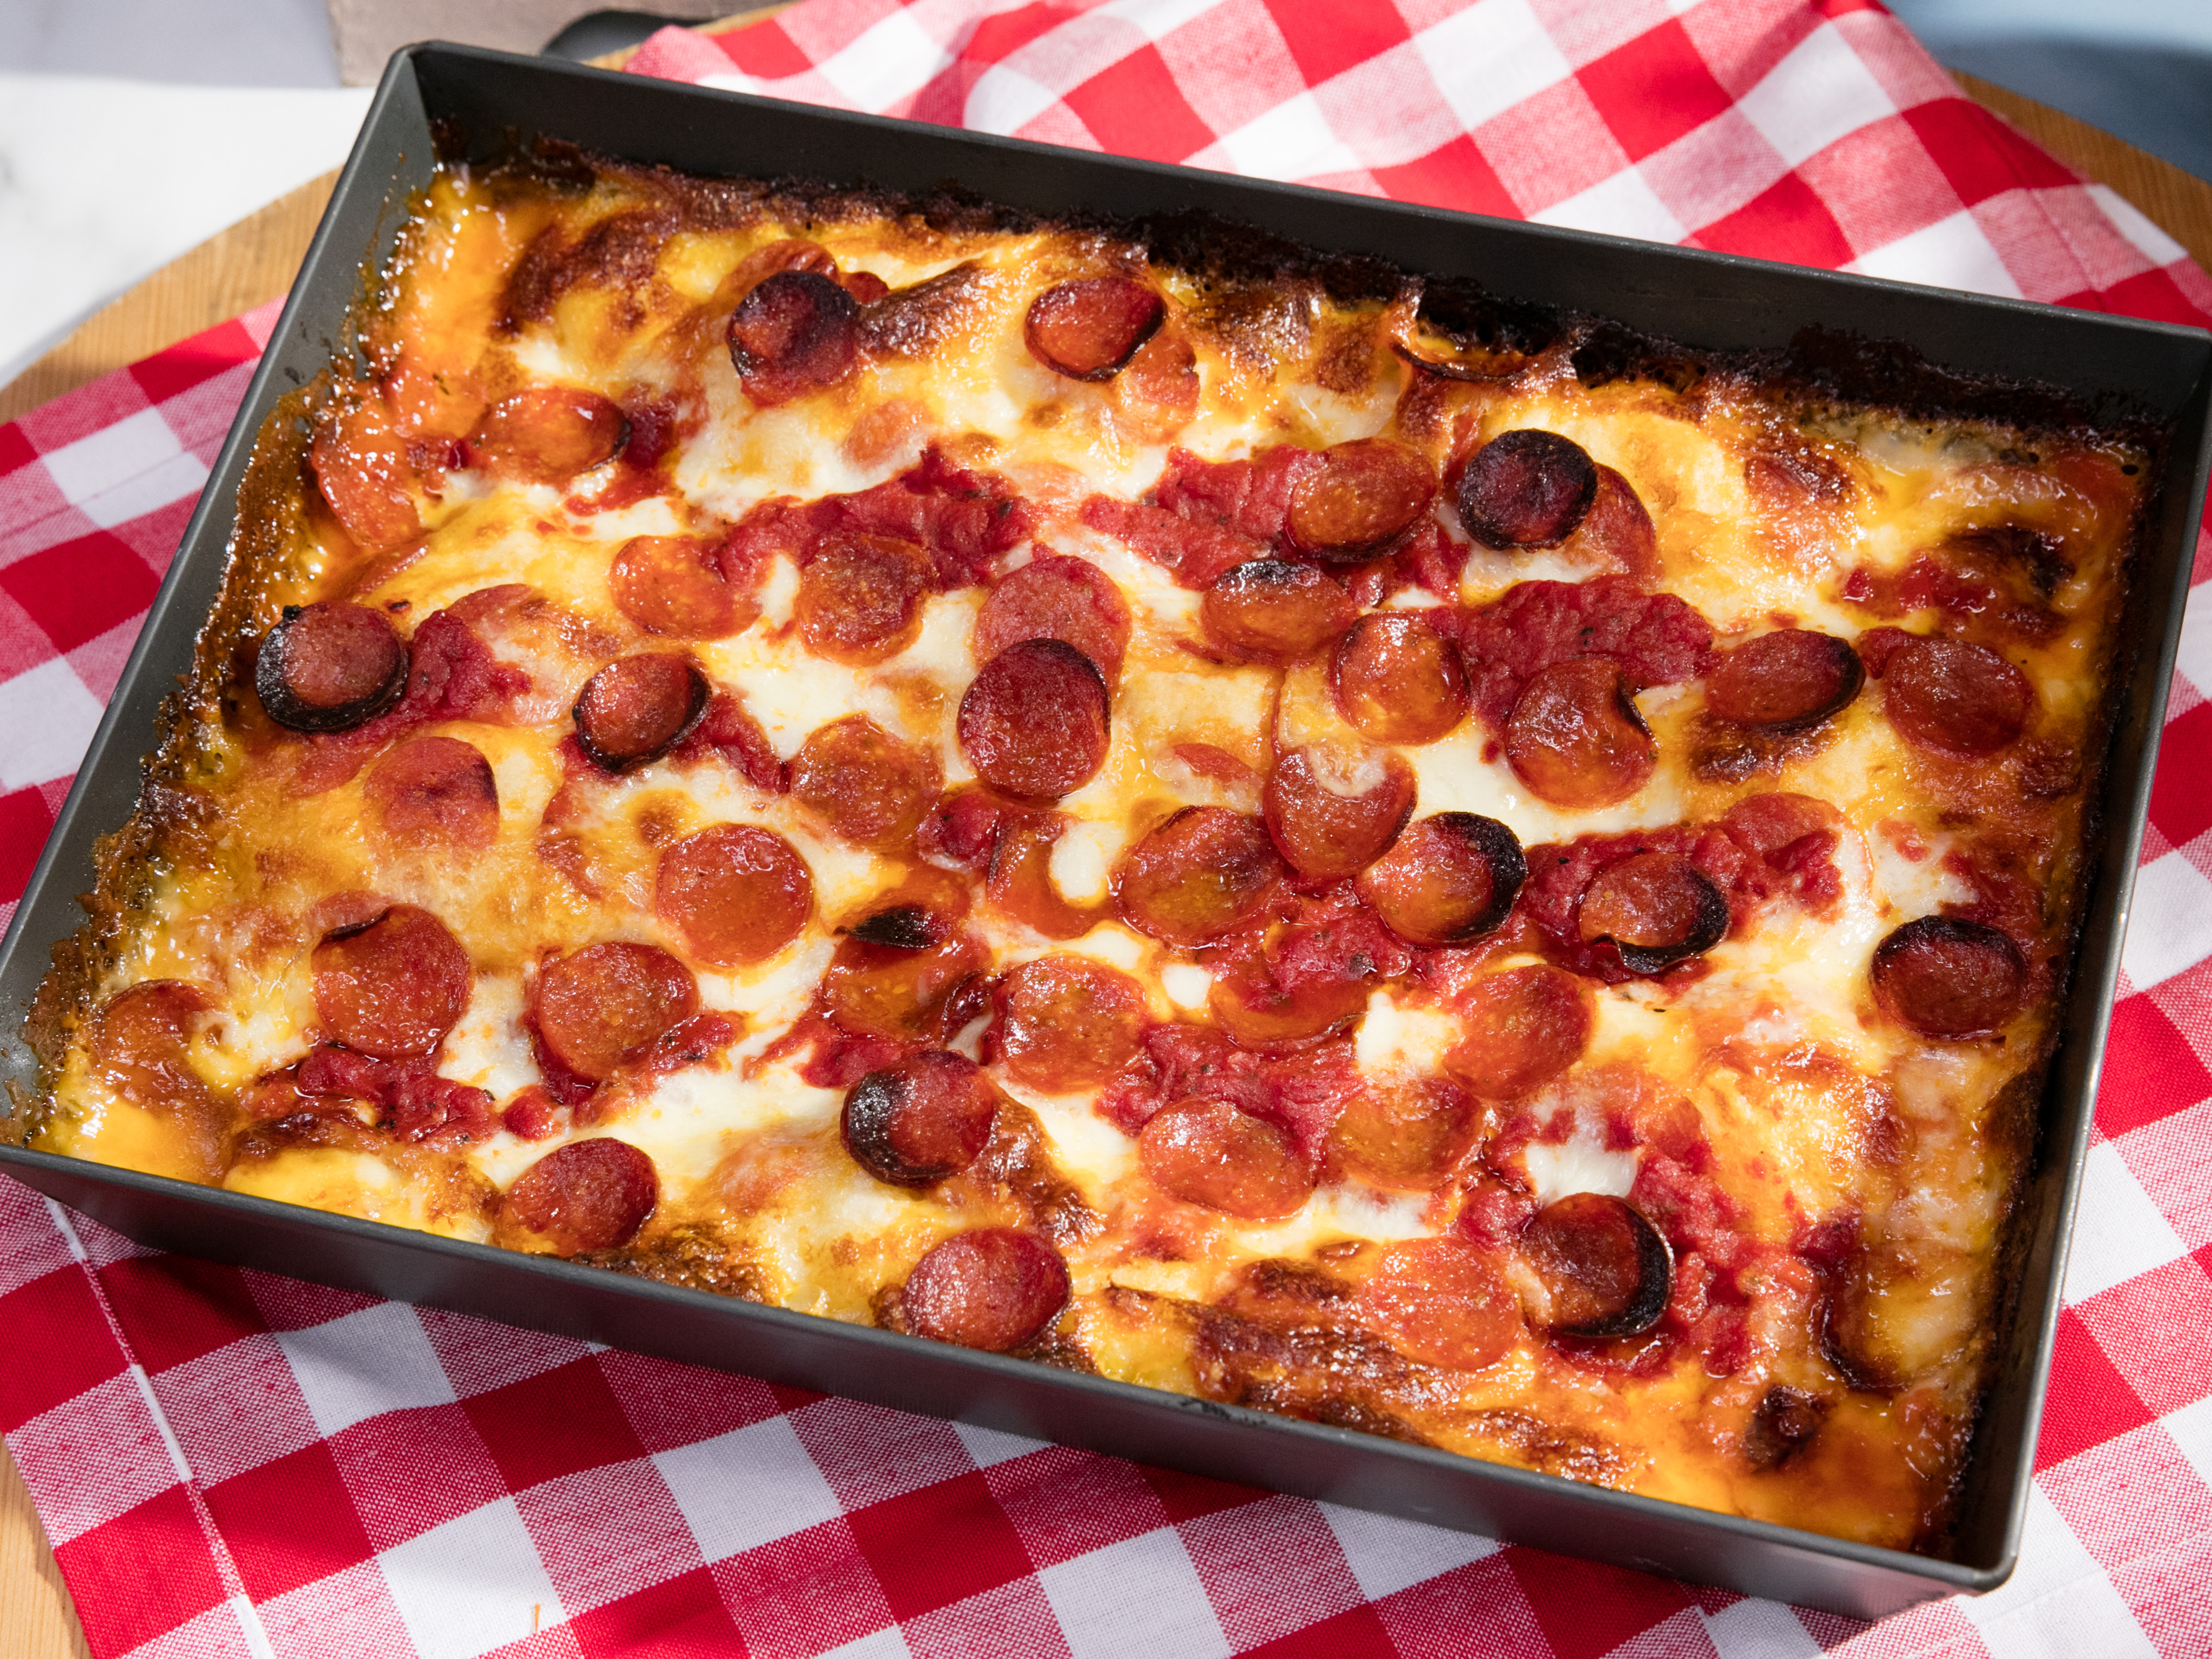 Detroit Pizza Recipe (with Pepperoni)